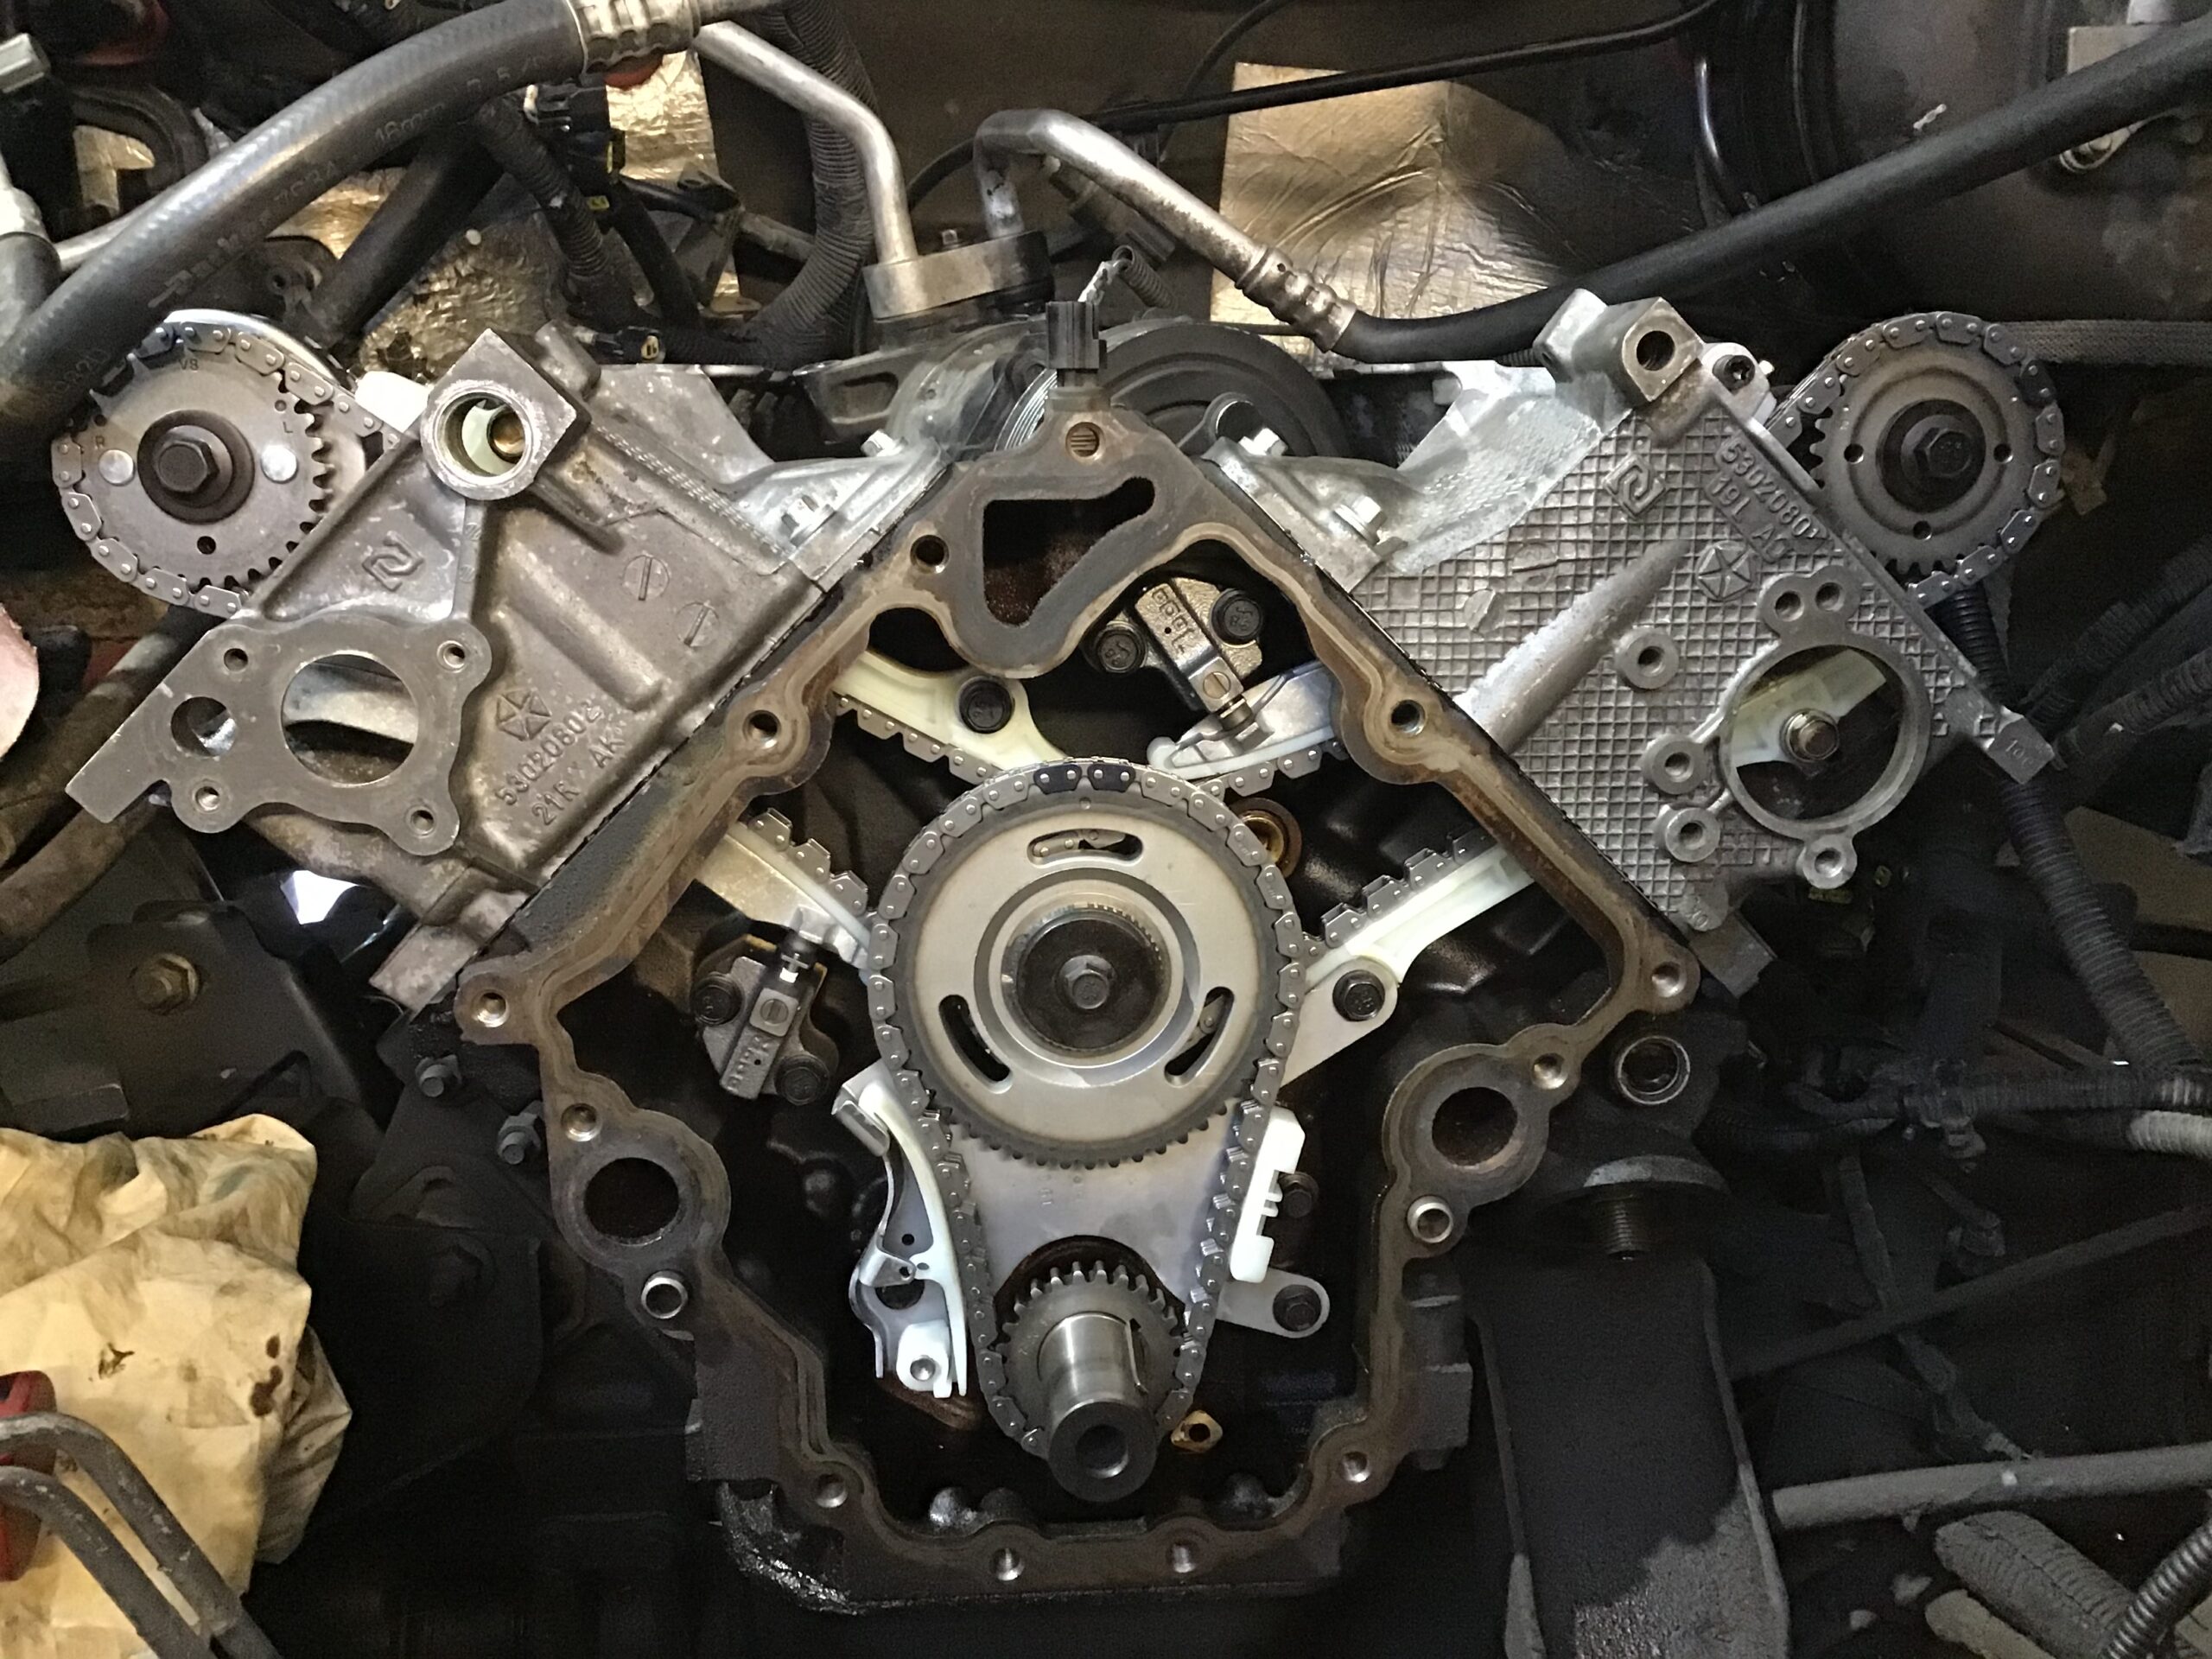 Image of a timing chain job done by Scofield Automotive of Roseburg and Green, OR